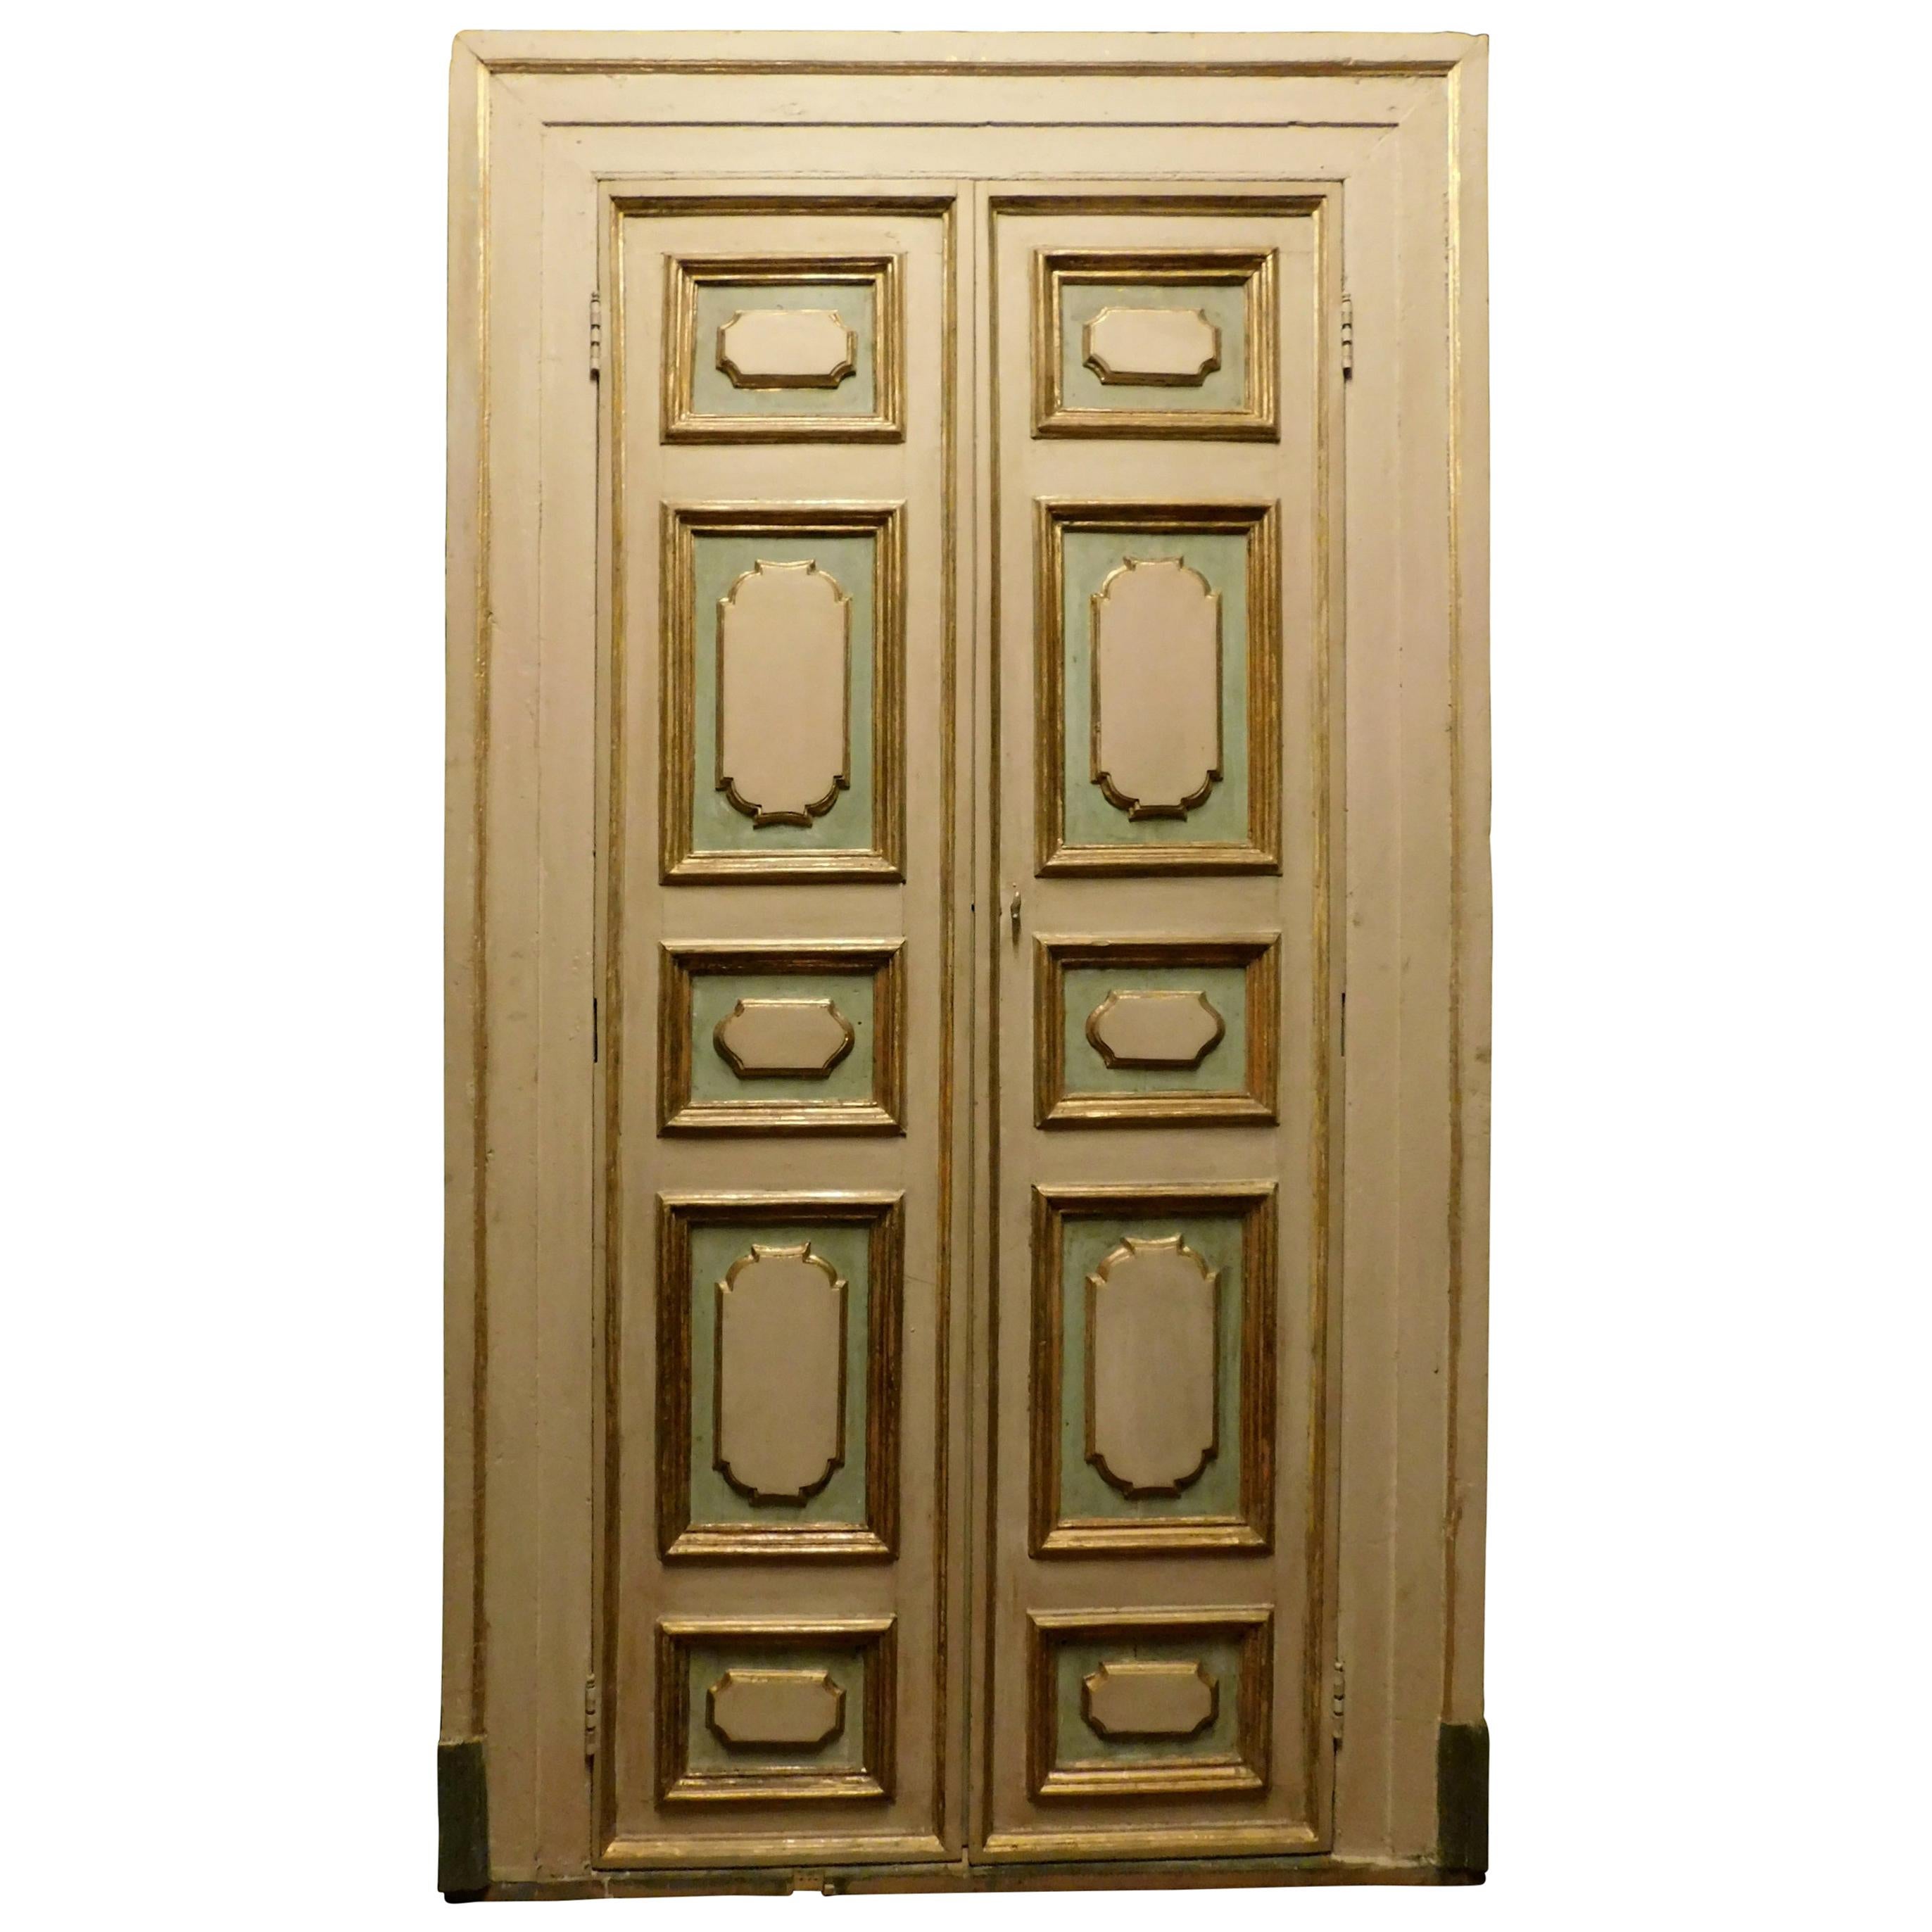 Antique Double Door Lacquered/Gilded with Frame, '700 Italy